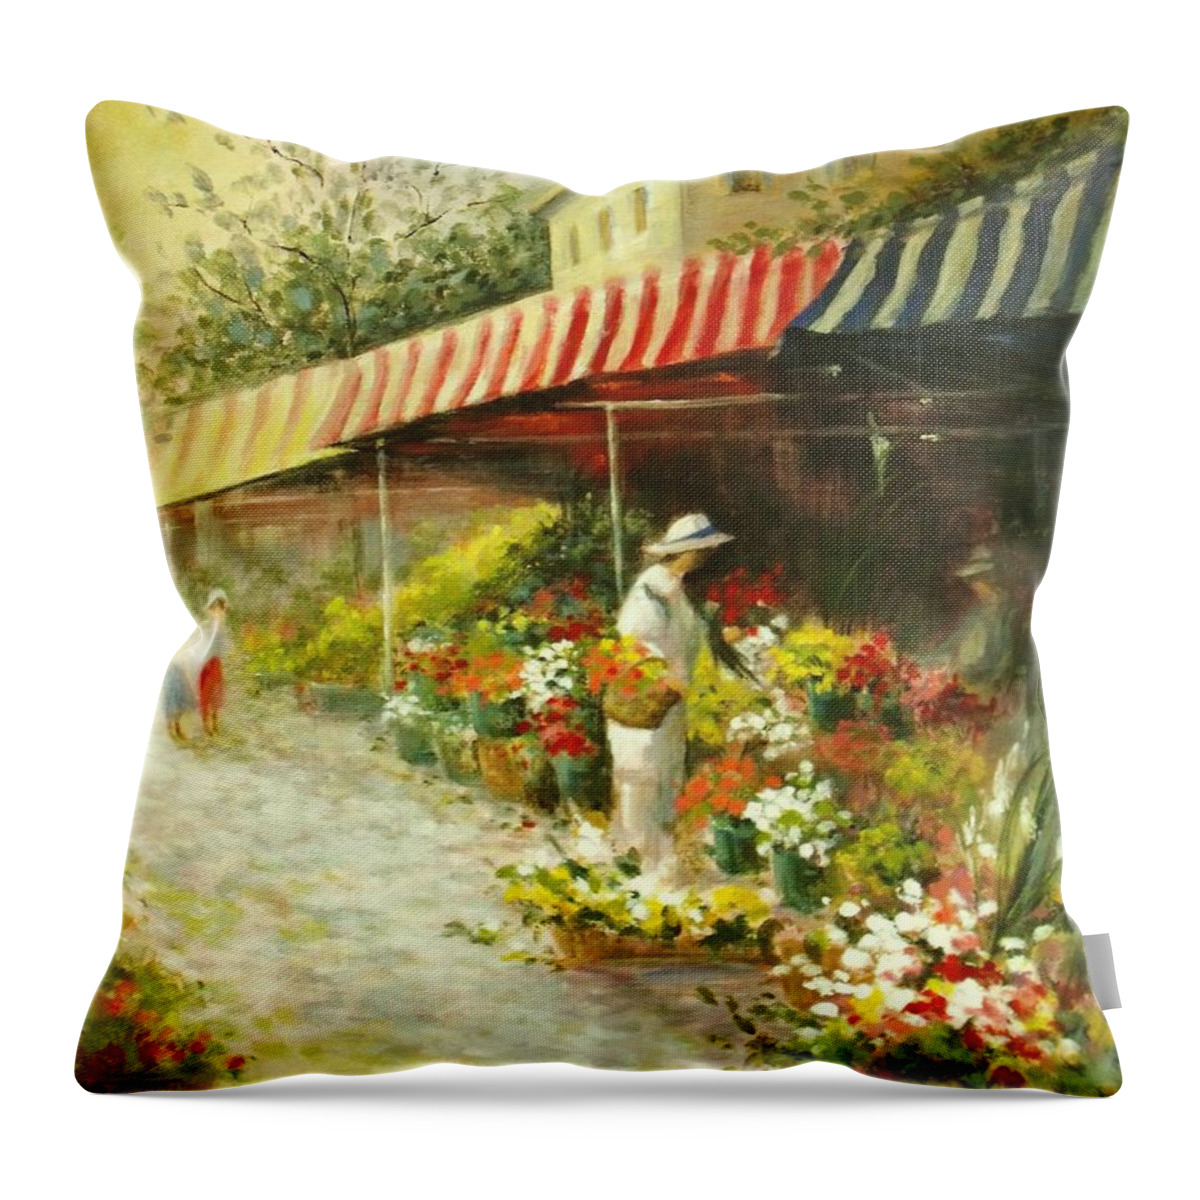 Canvas Prints Throw Pillow featuring the painting Flower Market by Madeleine Holzberg